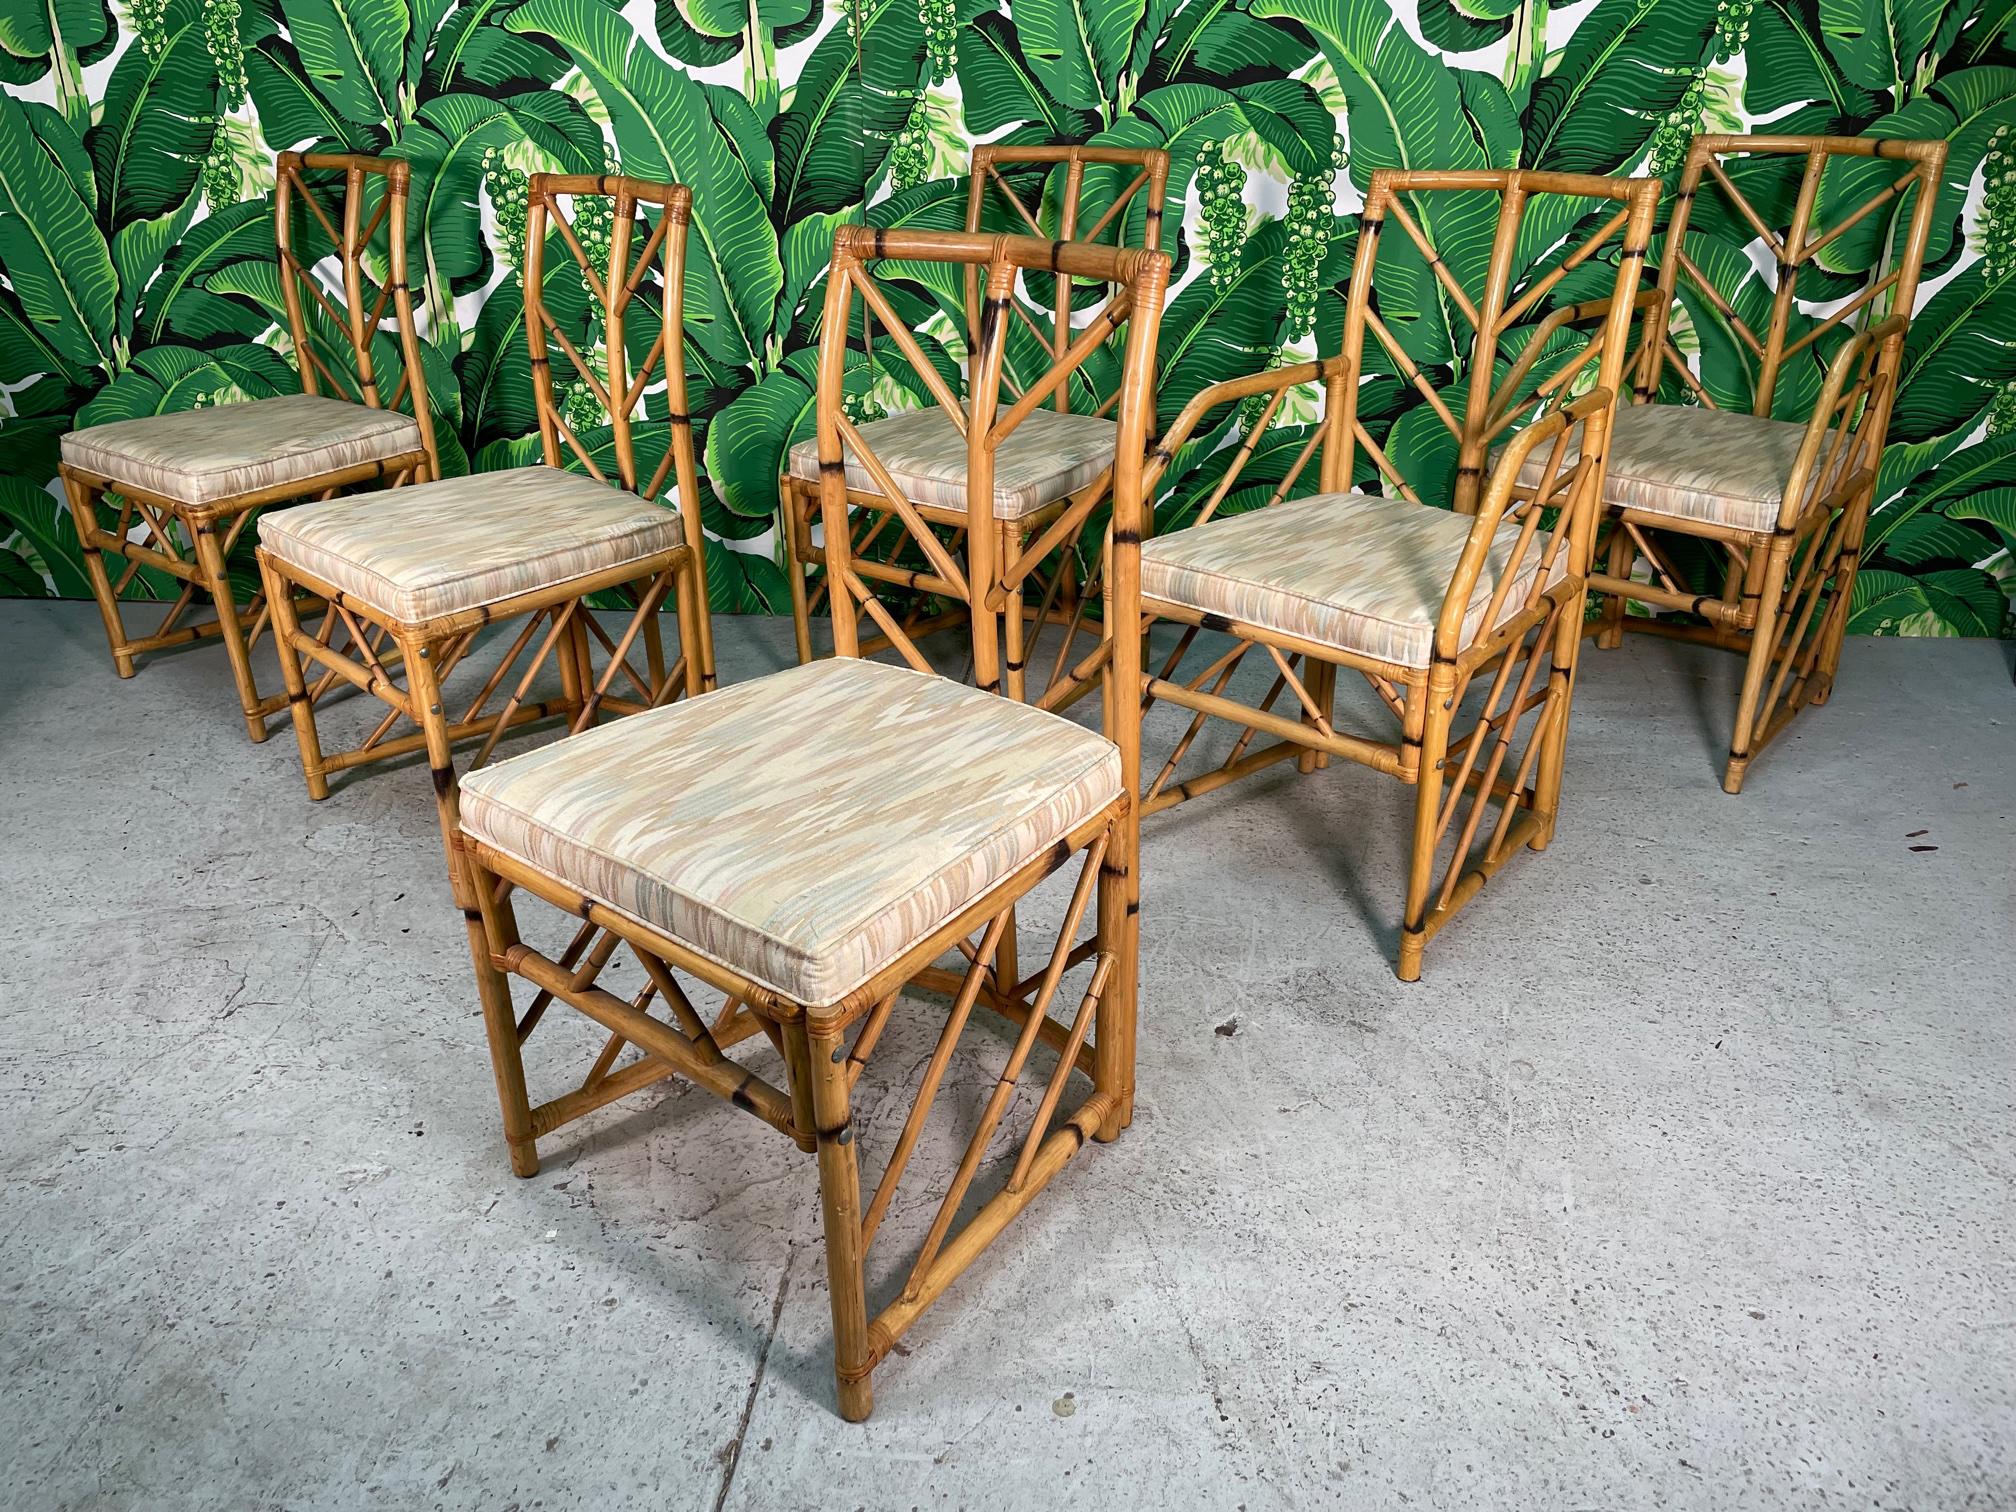 Set of six rattan dining chairs feature a unique chevron pattern fretwork. Set consists of two arm chairs and four side chairs. Good condition with minor imperfections consistent with age, mainly on arms. See photos for condition details.
For a